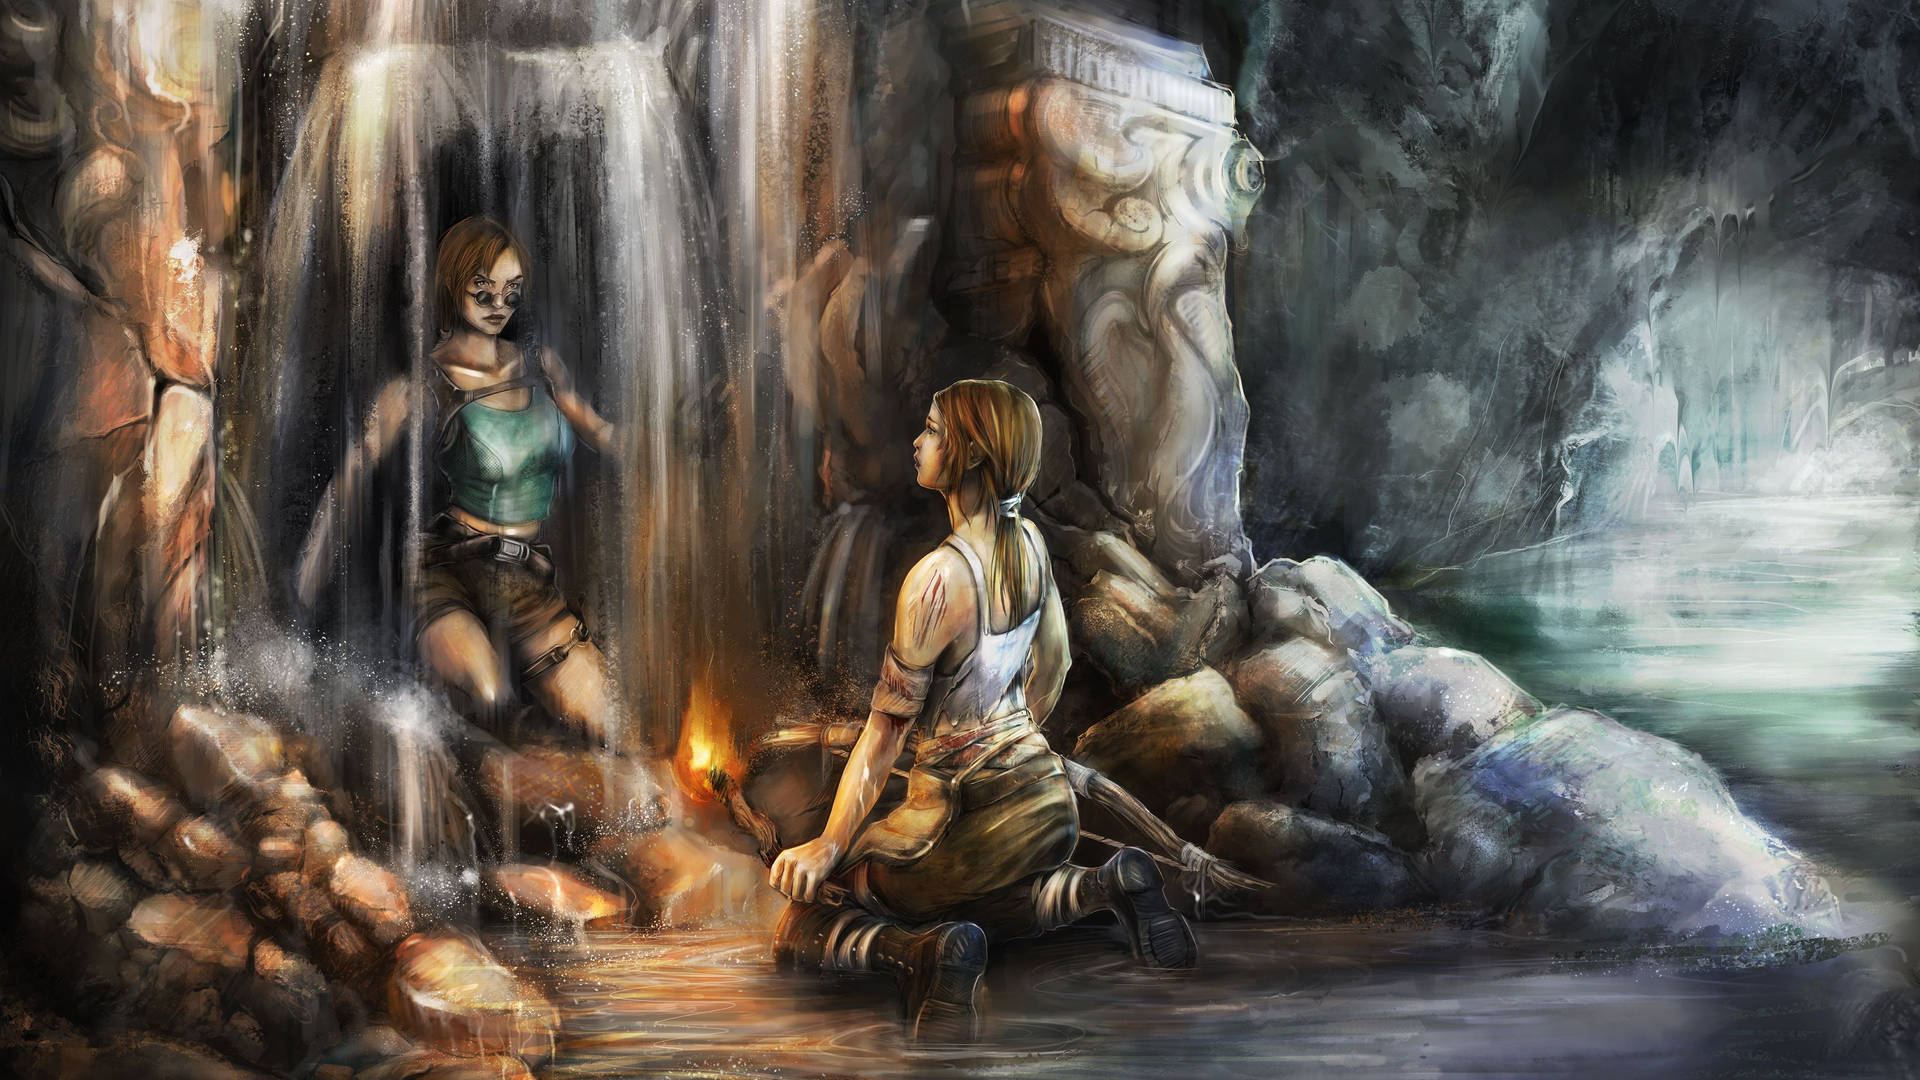 Free Tomb Raider Wallpaper Downloads, [200+] Tomb Raider Wallpapers for  FREE 